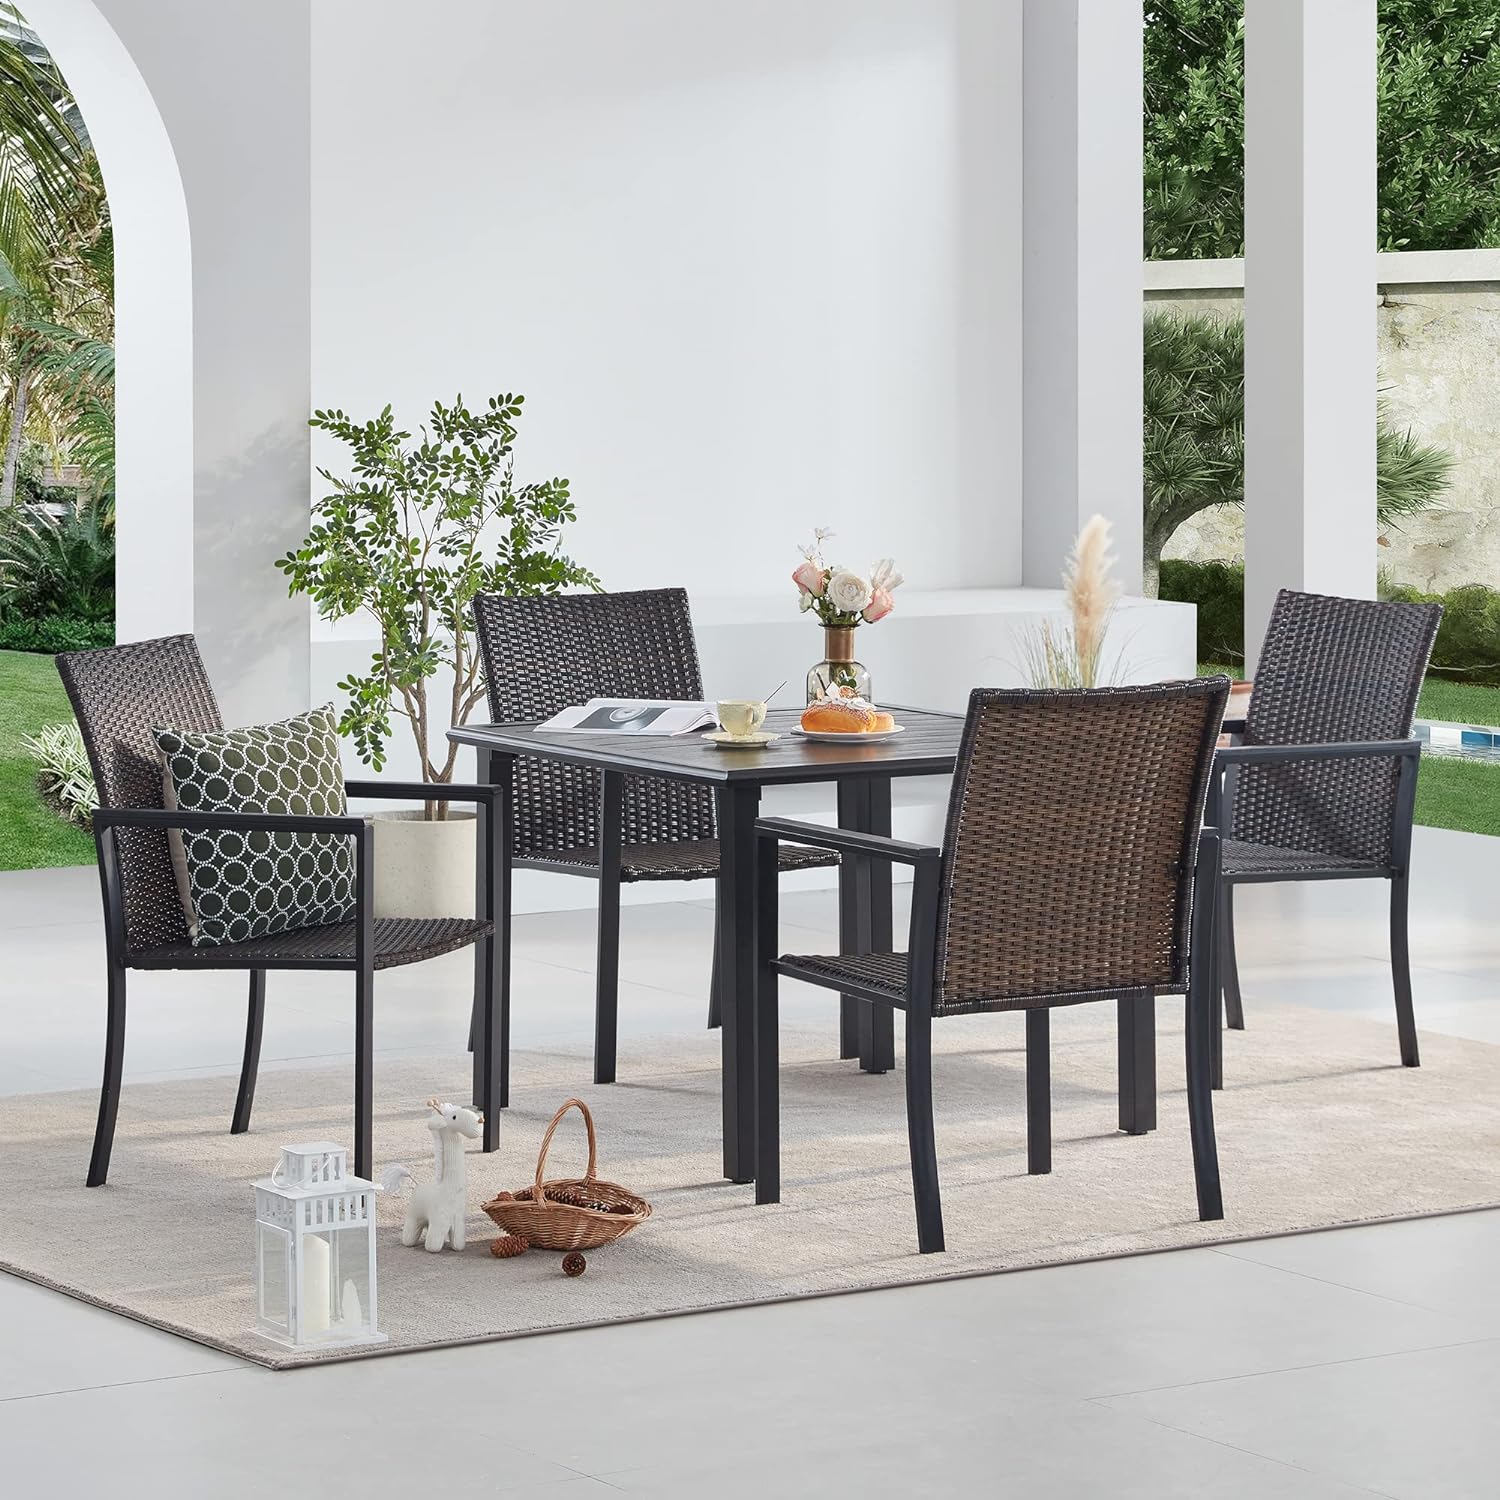 Vicllax 5-Piece Patio Furniture Set for 4, Outdoor Wicker Dining Set